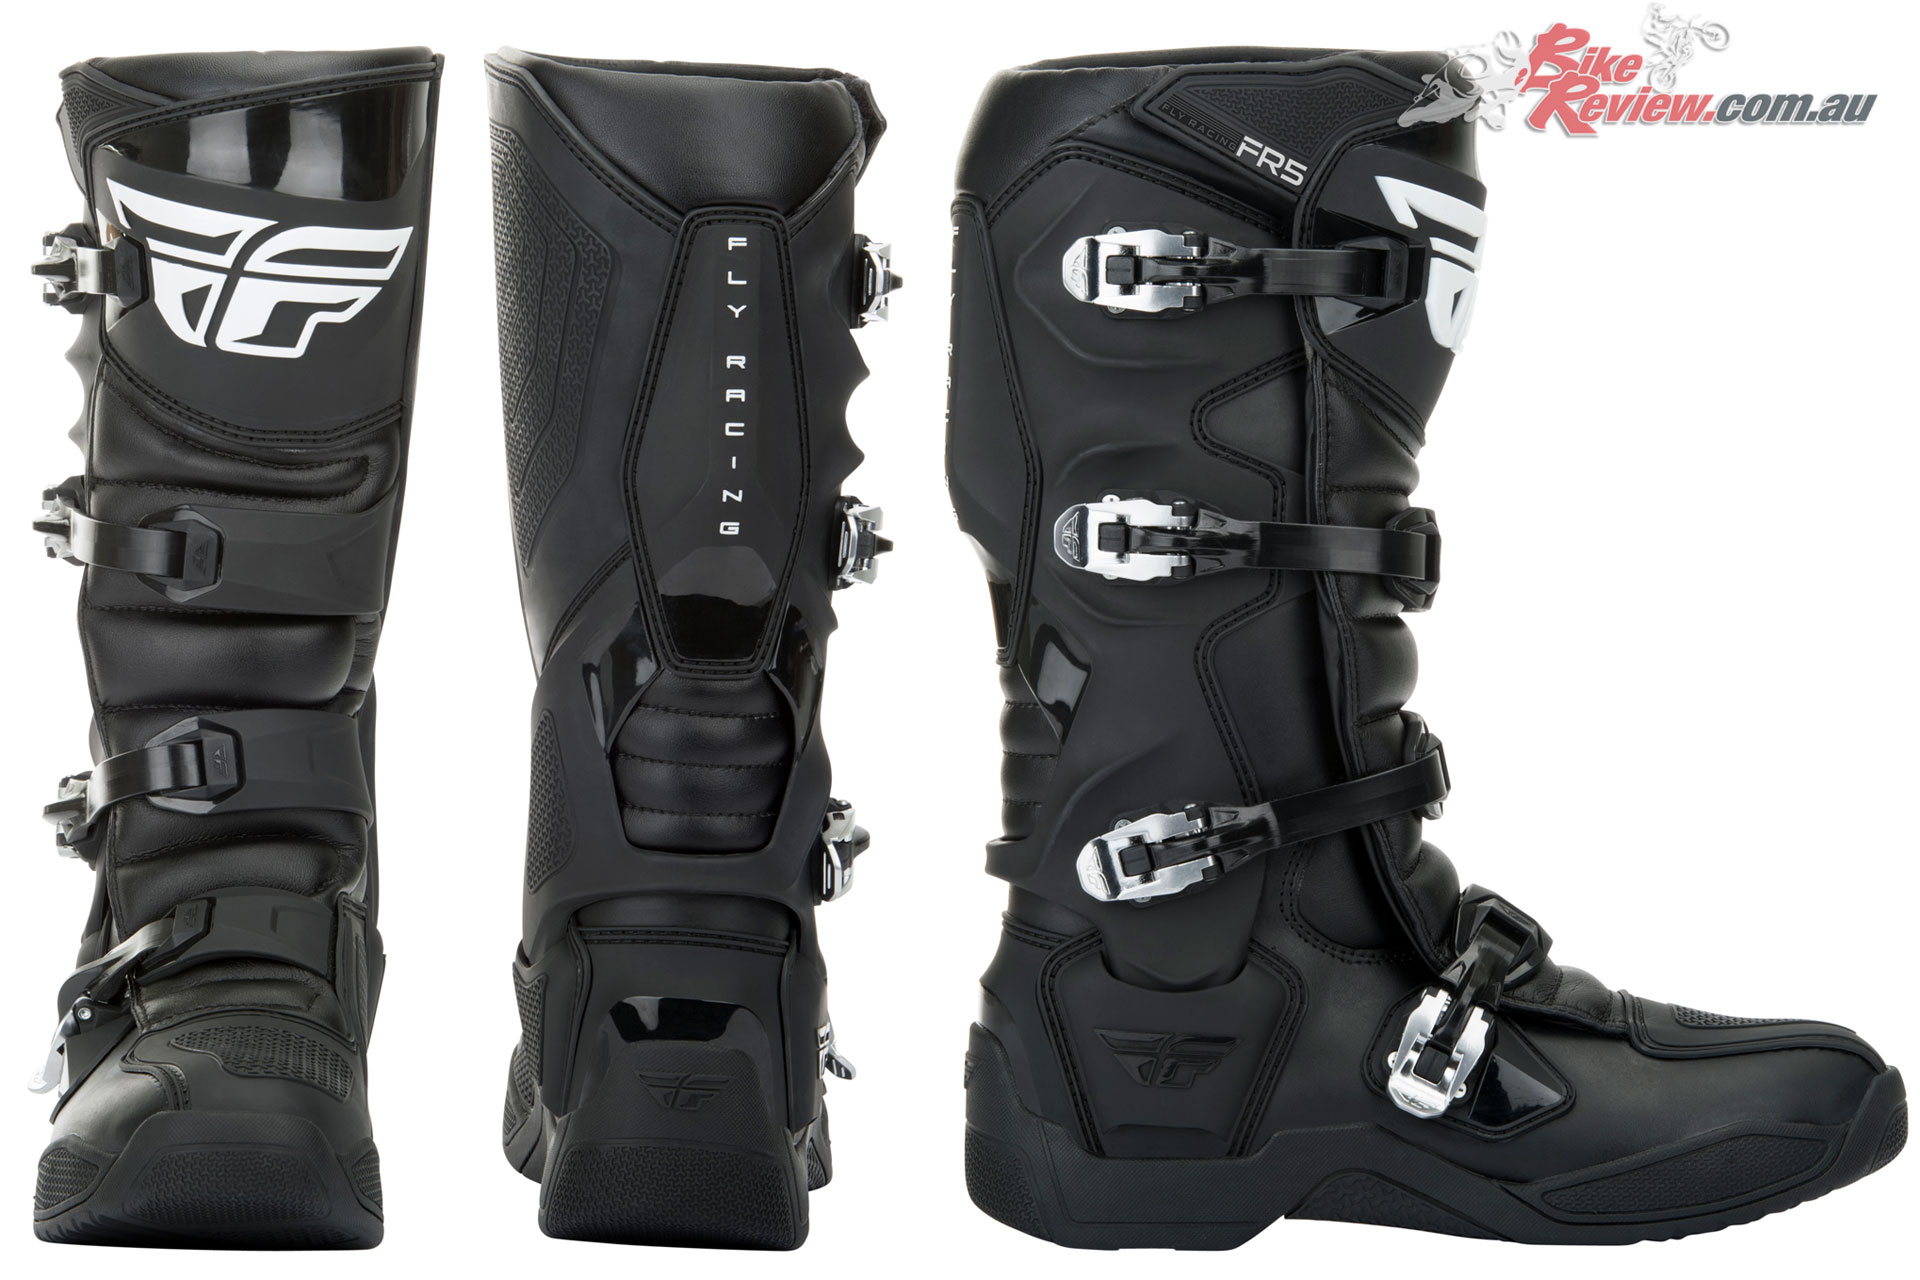 2019 Fly Racing FR-5 Boots now available for $349.95 RRP